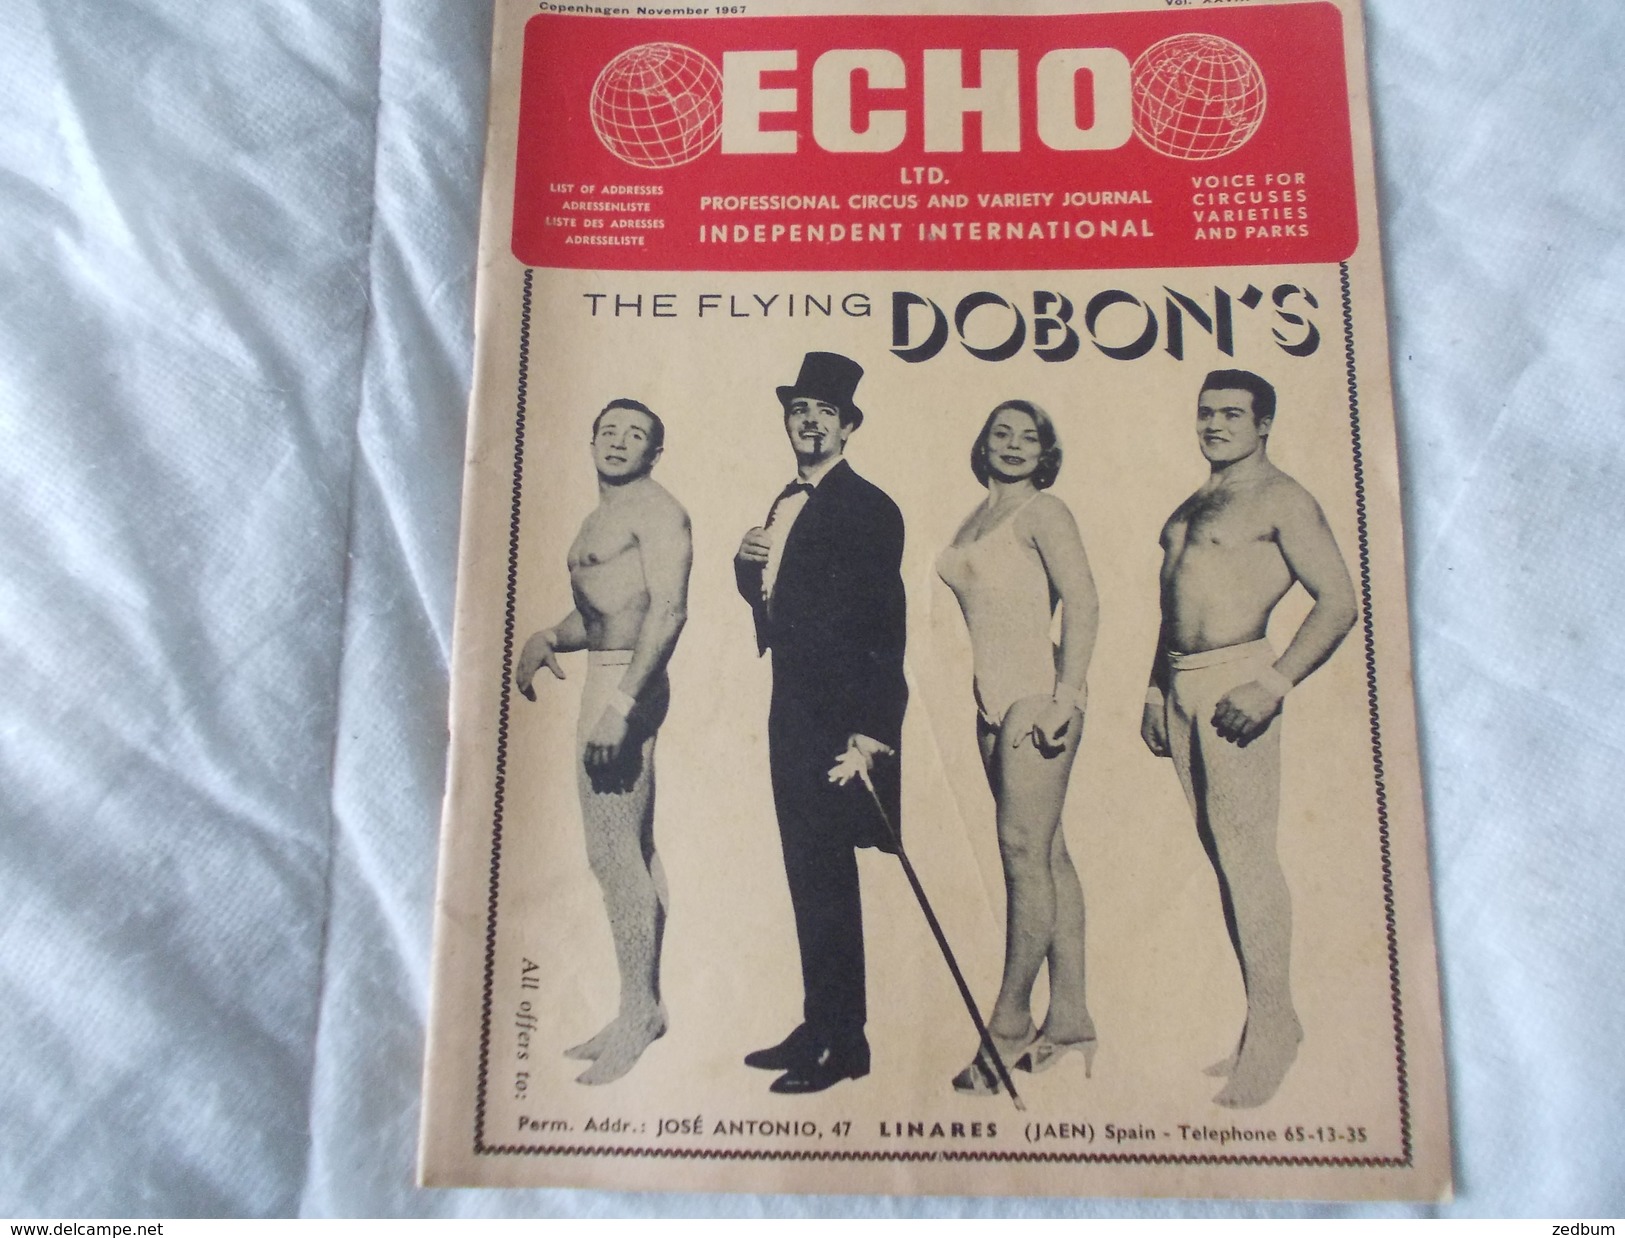 ECHO LTD Professional Circus And Variety Journal Independent International N° 309 November 1967 - Divertimento